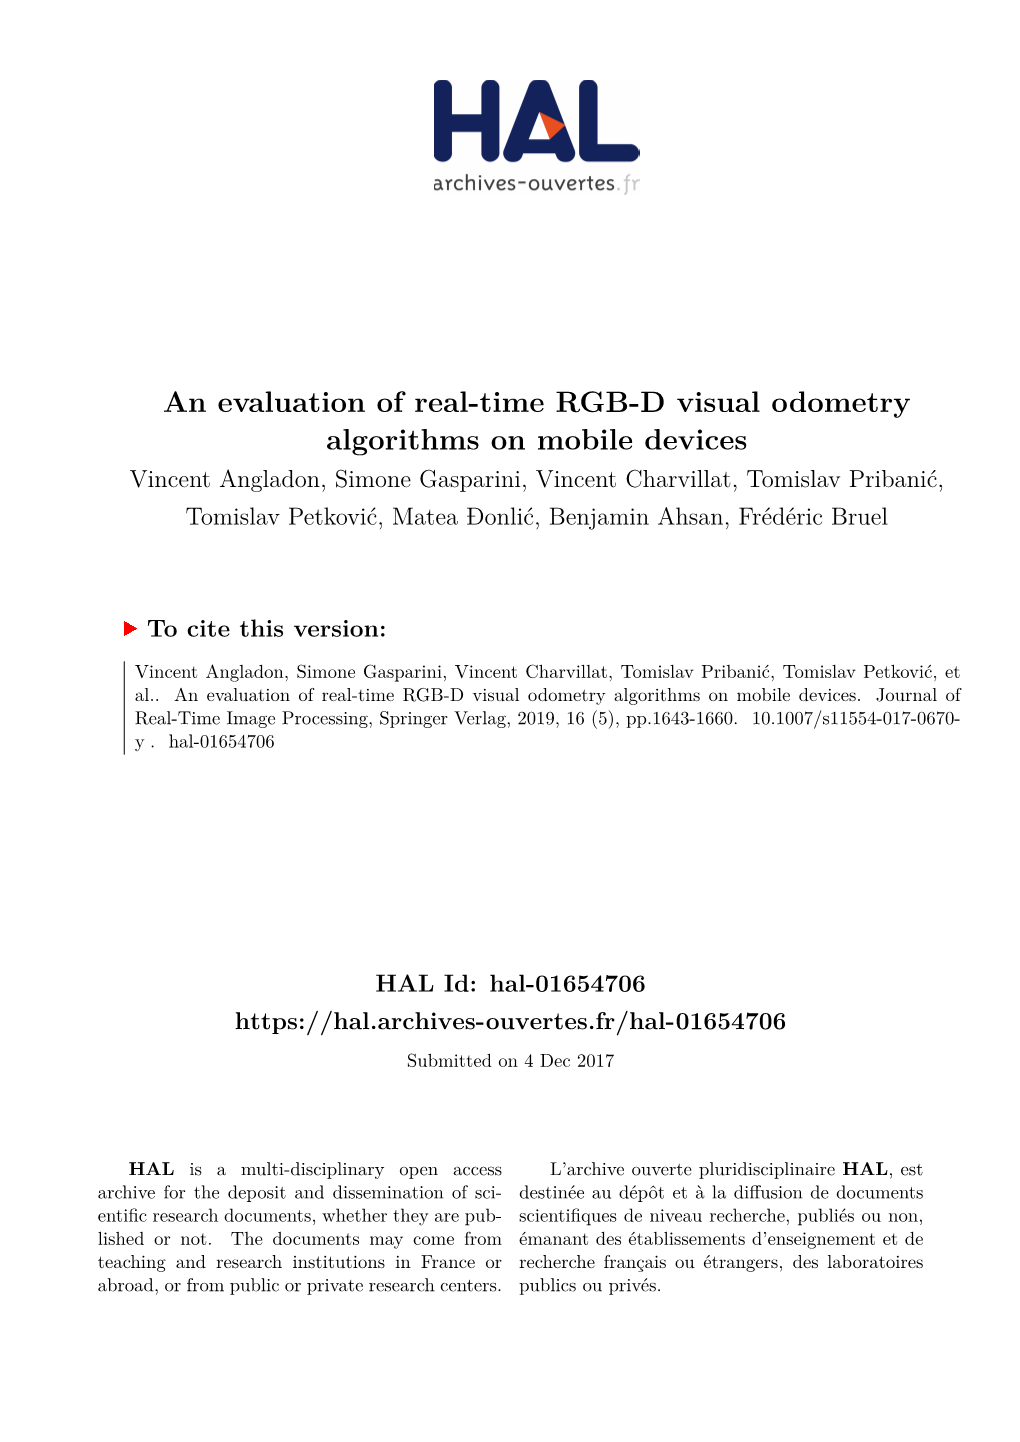 An Evaluation of Real-Time RGB-D Visual Odometry Algorithms On